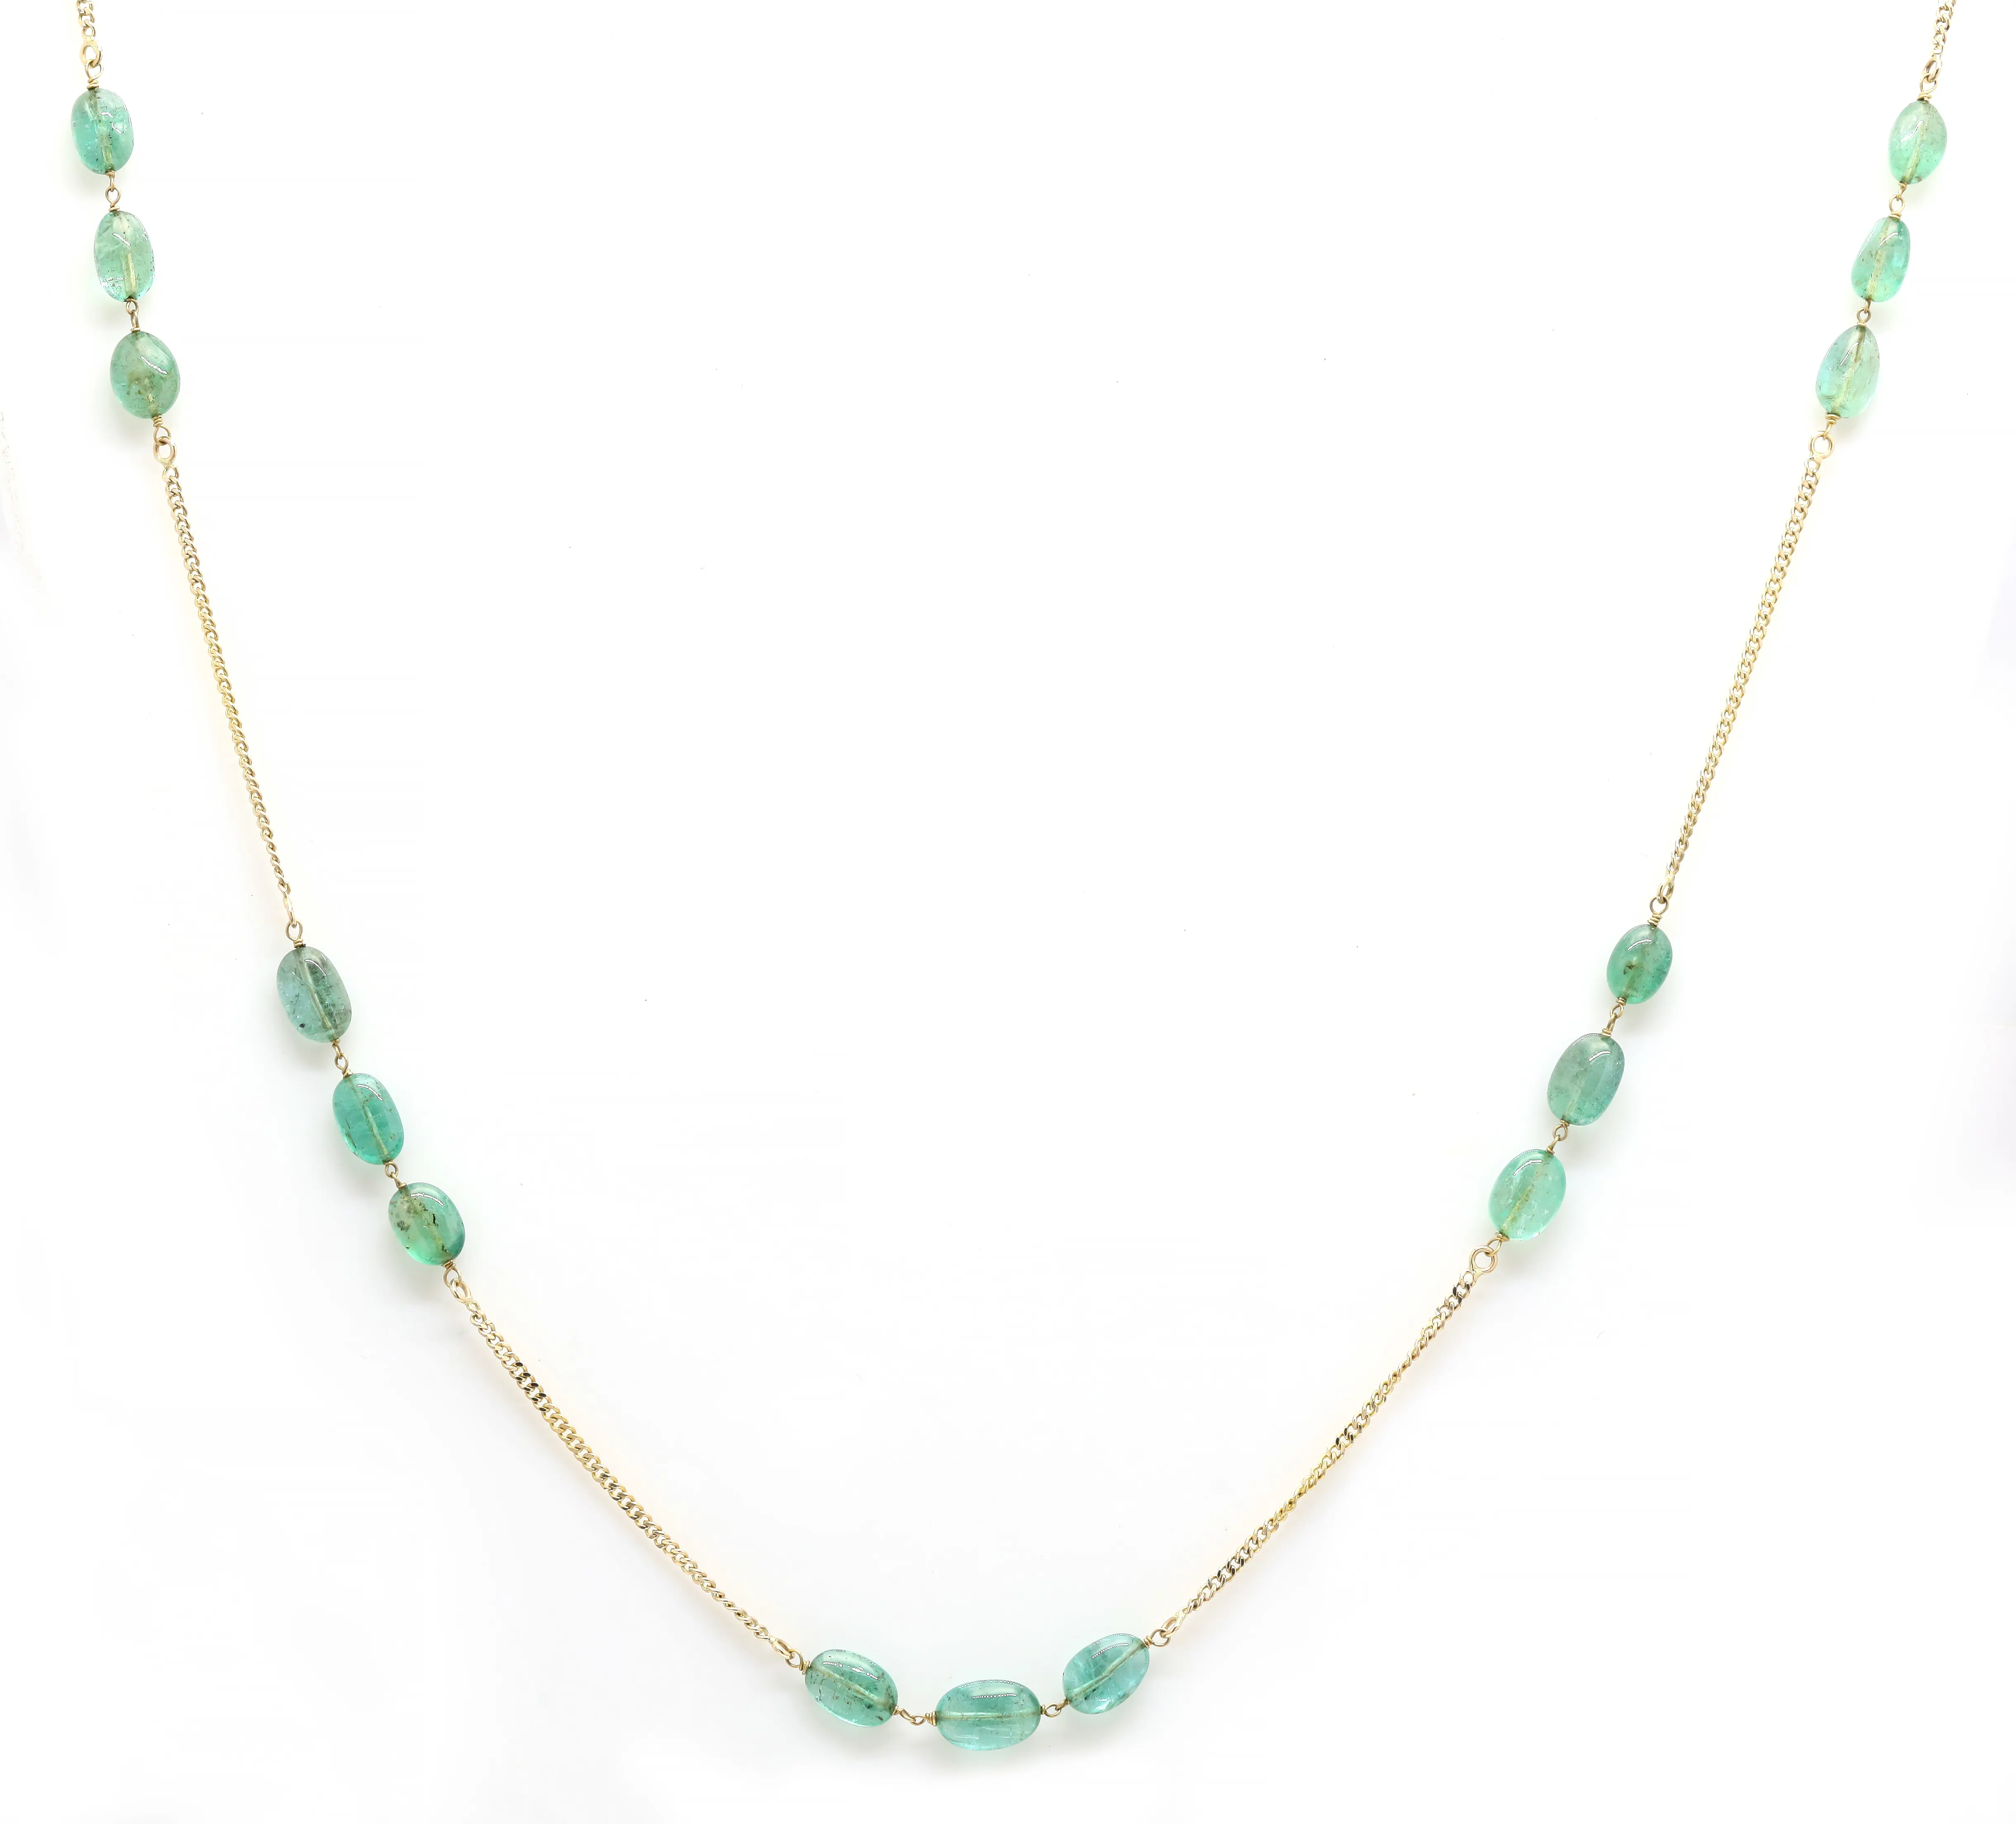 Best Selling Product Natural Birthstone Emerald Necklace 18k Solid Yellow Gold Tumble Shape Beaded Necklace Authentic Jewelry